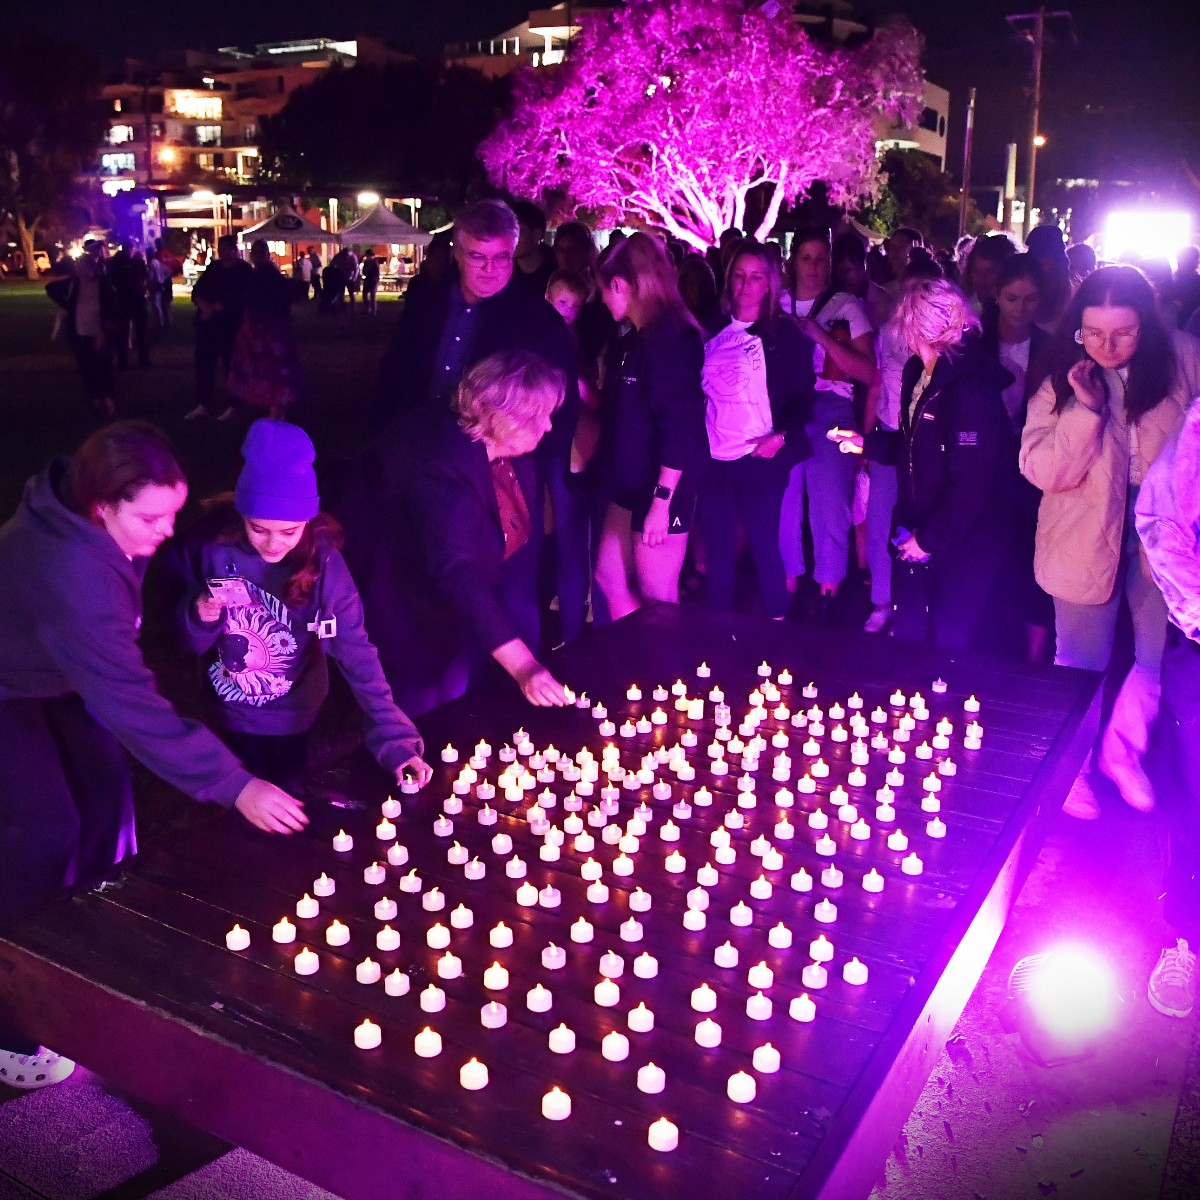 The Sunshine Coast community has stood together at Cotton Tree to mark Domestic and Family Violence Prevention Month (May) at the Candlelight Vigil and March. Thank you to everyone who attended 💜 Read more here 👉 oursc.com.au/community/coas…